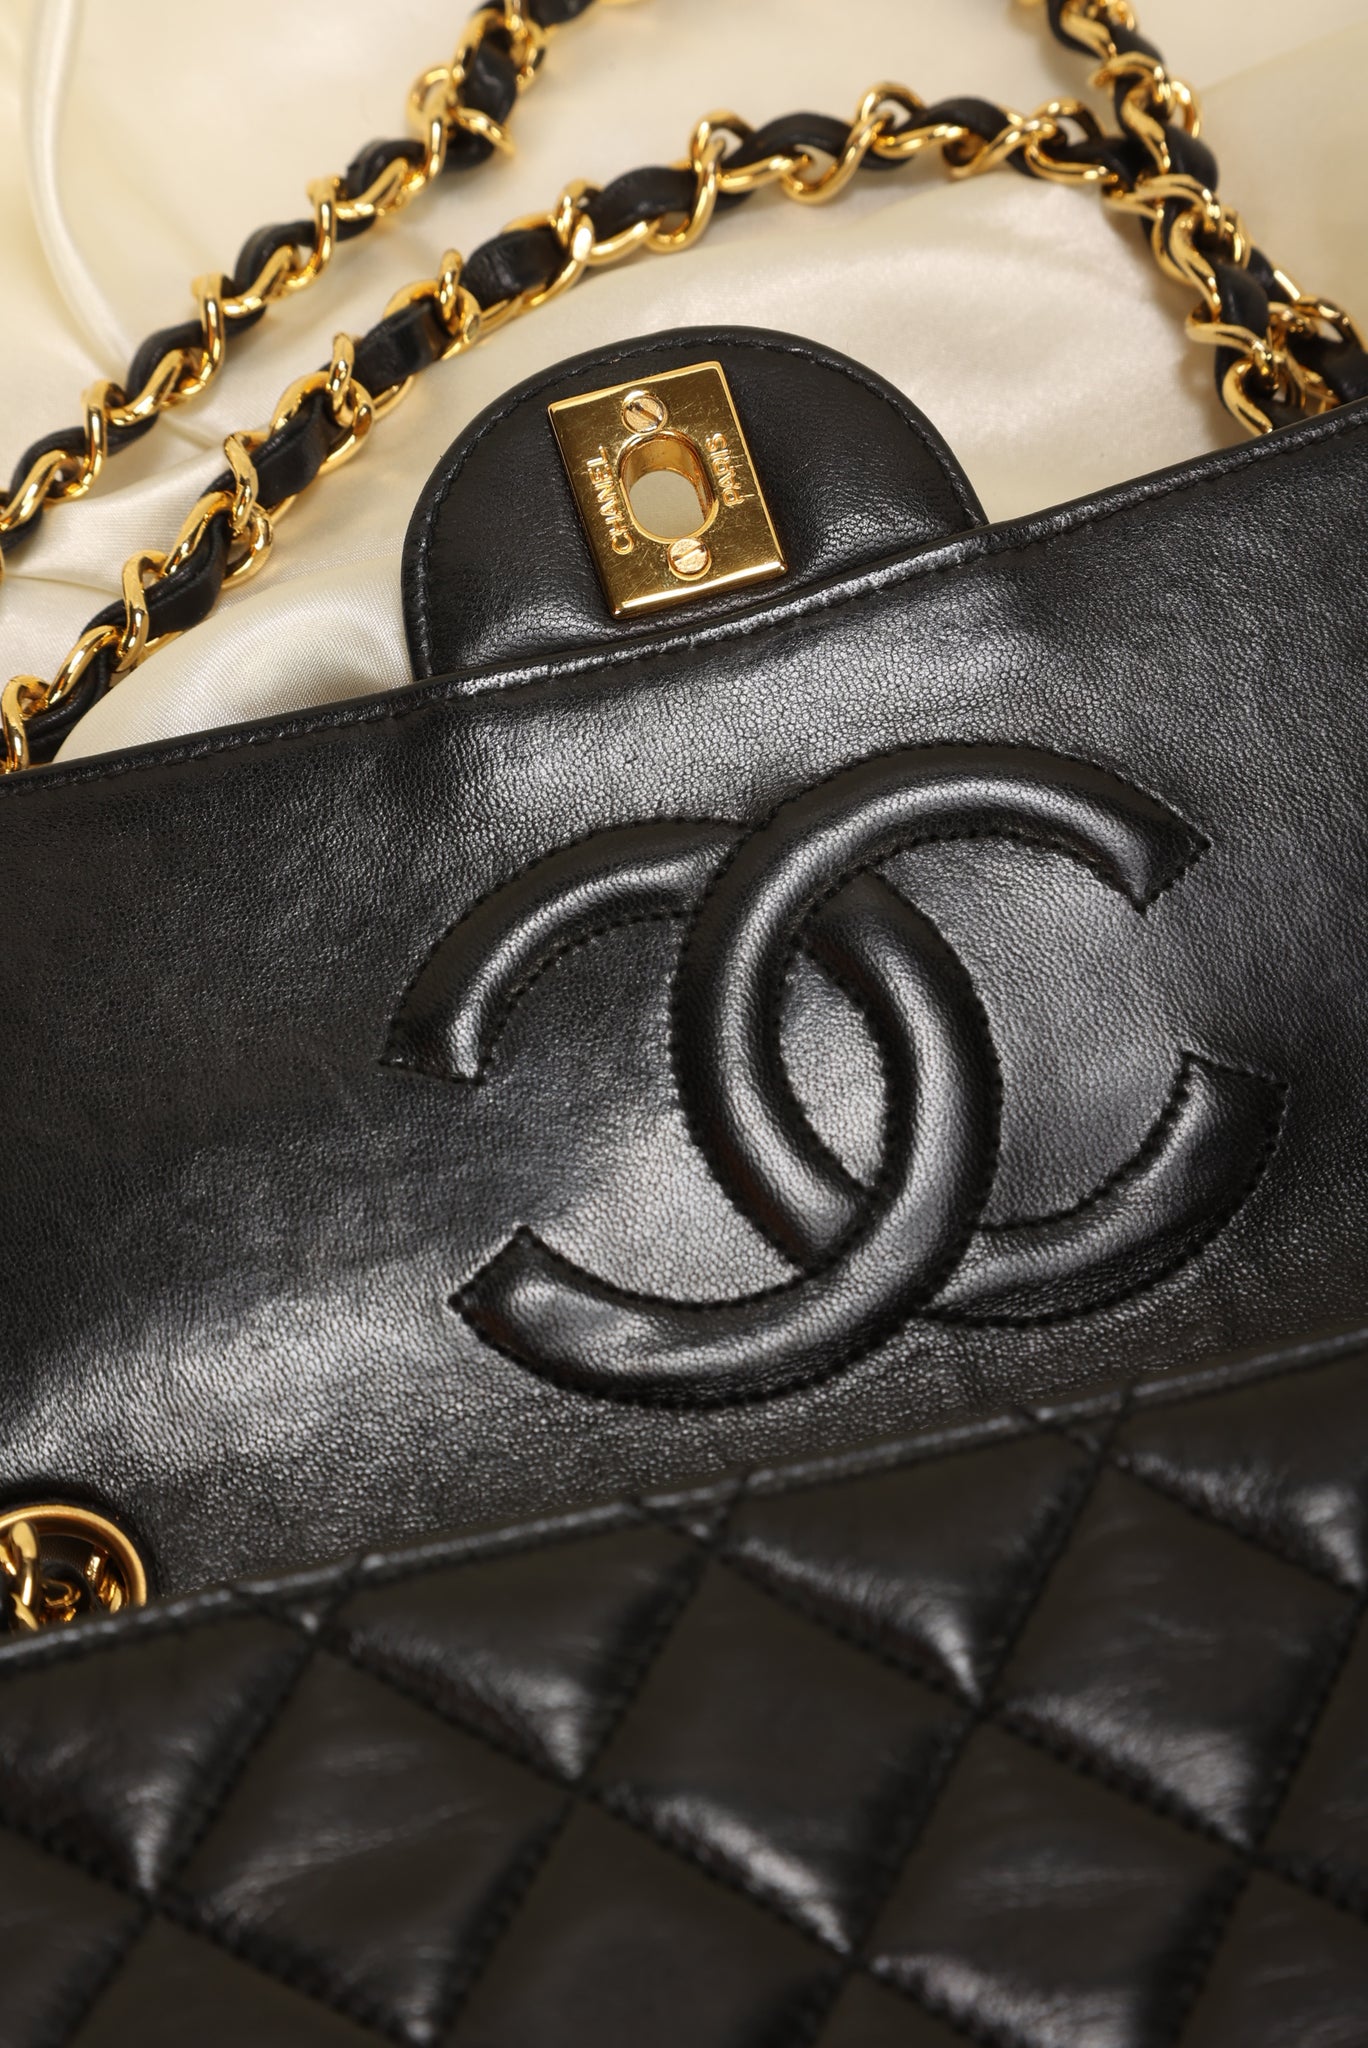 Extremely Rare Chanel Diana With Wallet